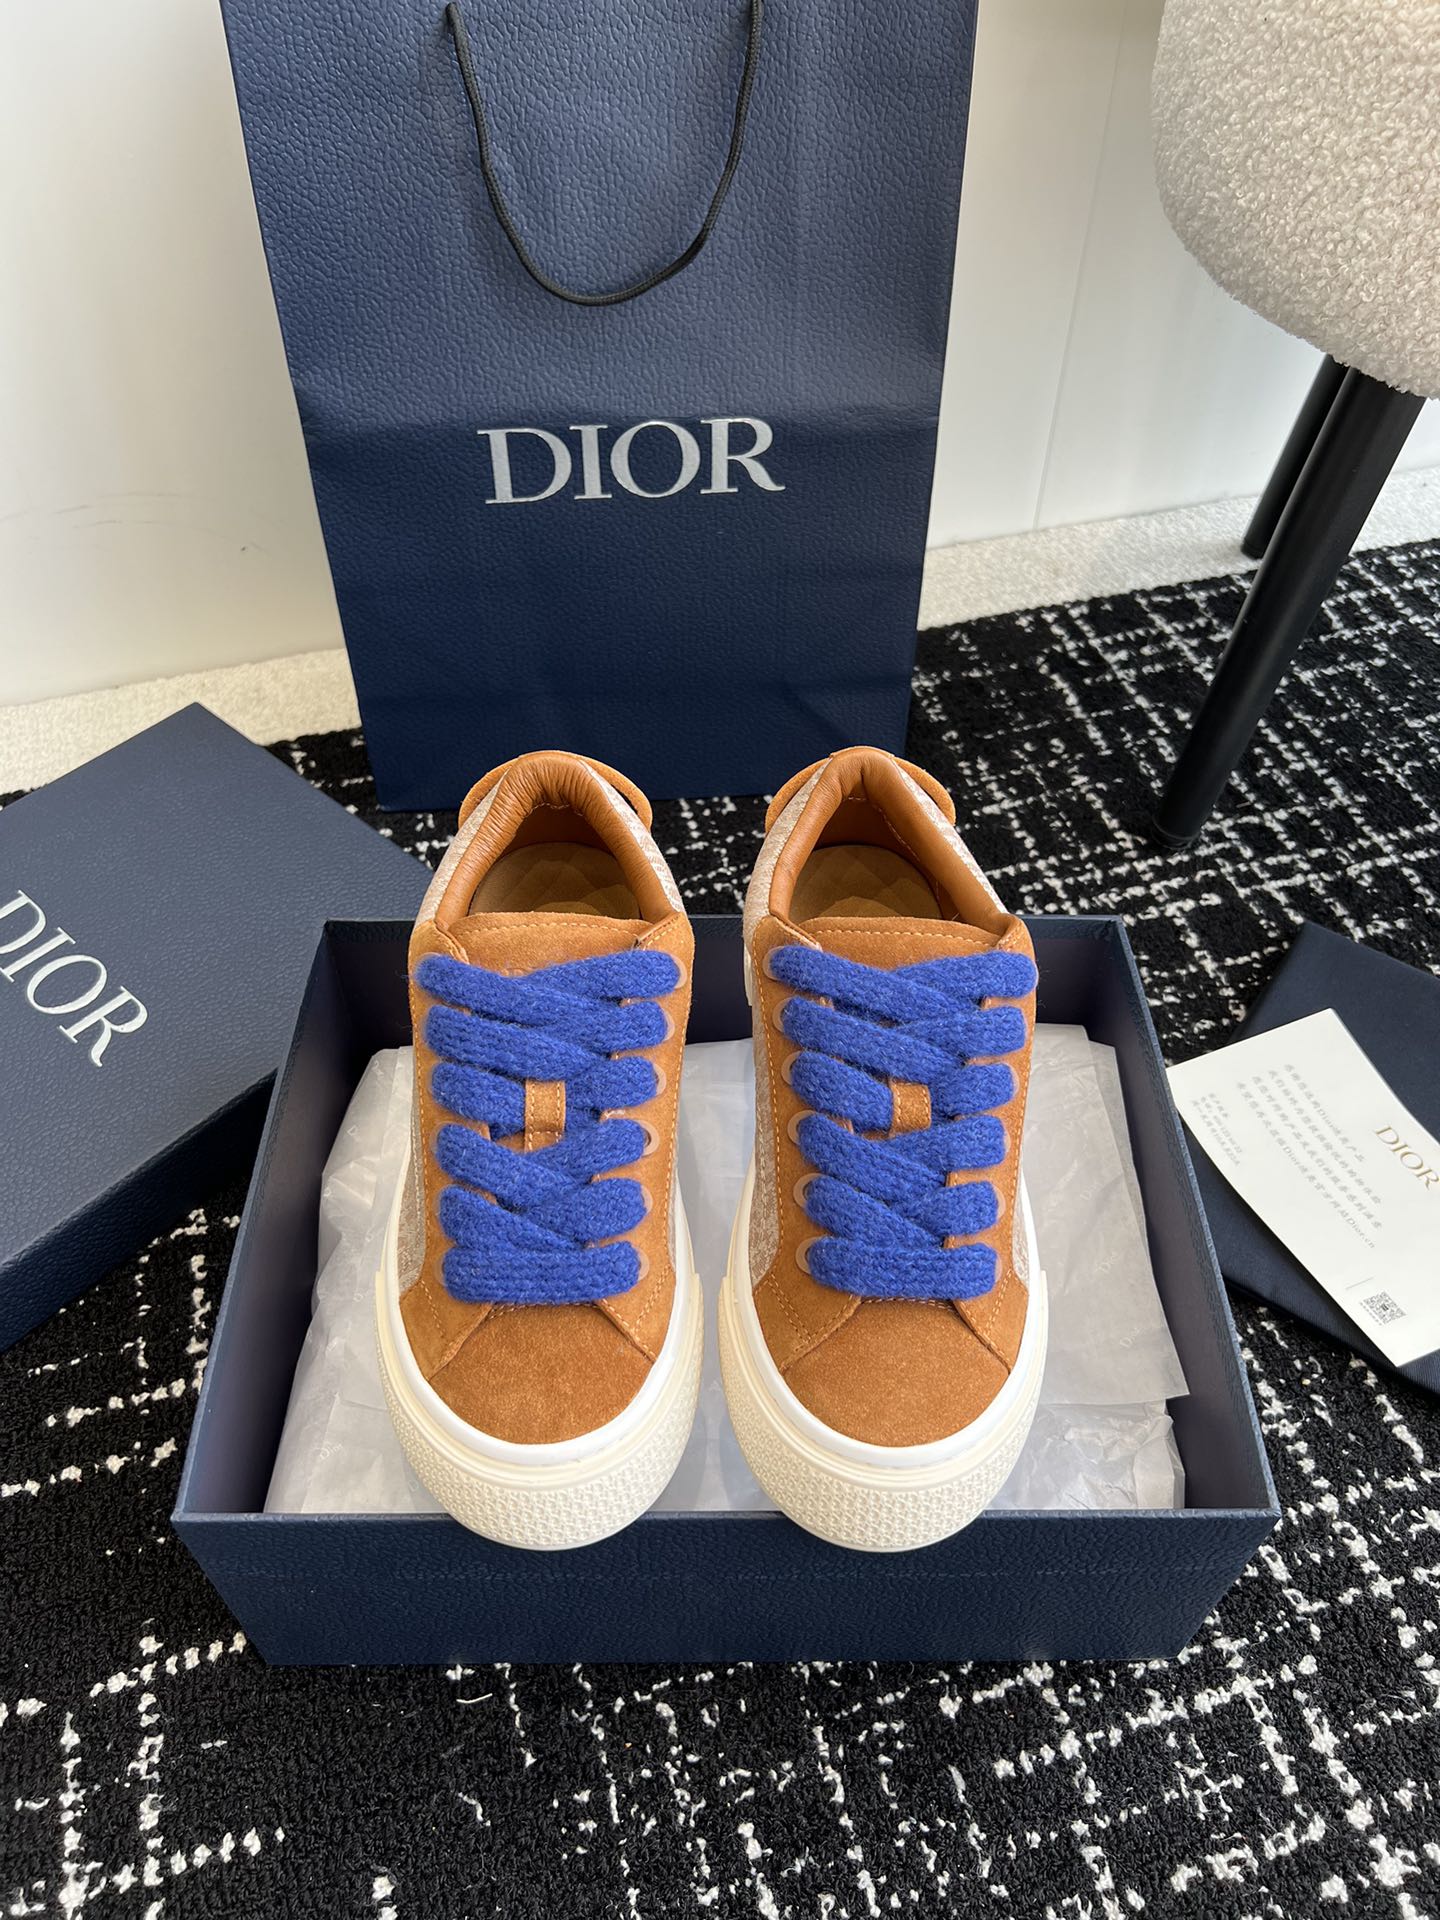 Dior Skateboard Shoes Sneakers Casual Shoes White Printing Horsehair Rubber Weave Oblique Casual